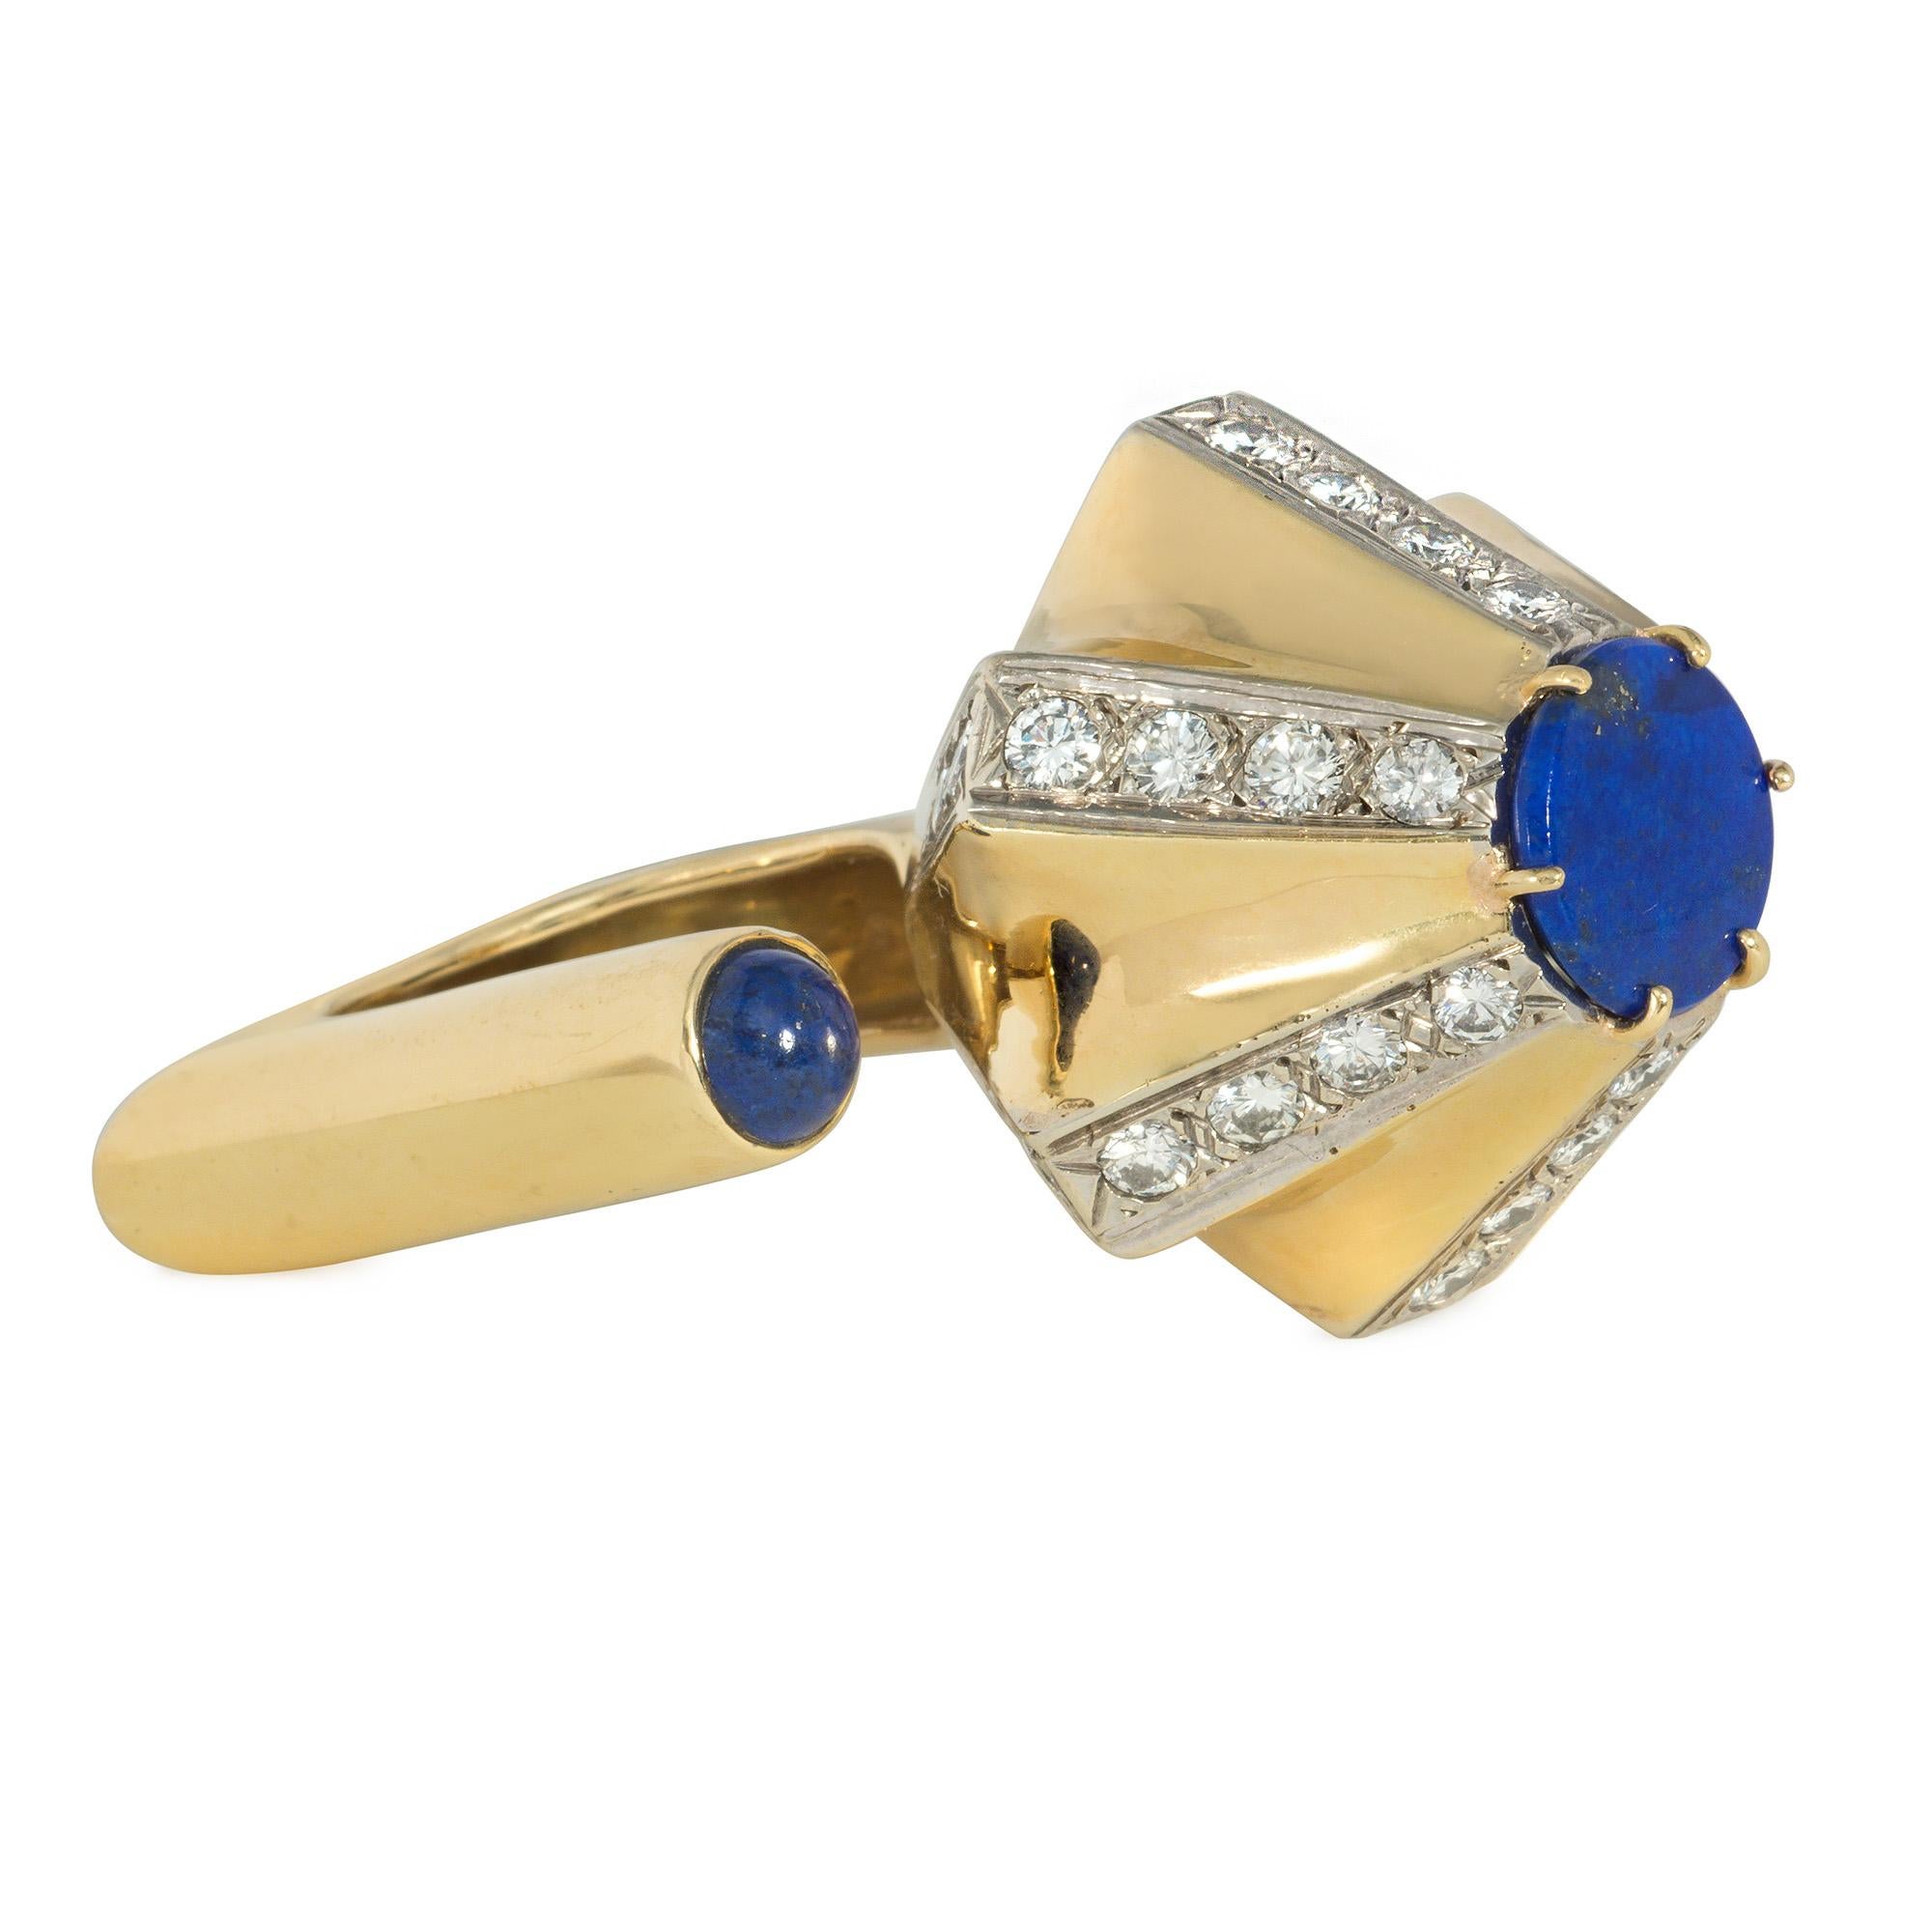 A 1970s lapis lazuli, diamond, and gold ring of fluted, lantern-shaped design, centered by a lapis disk surrounded by alternating diamond-set and polished gold segments, with an open tubular square mount ending in a lapis bead, in 18k. Dinh Van,